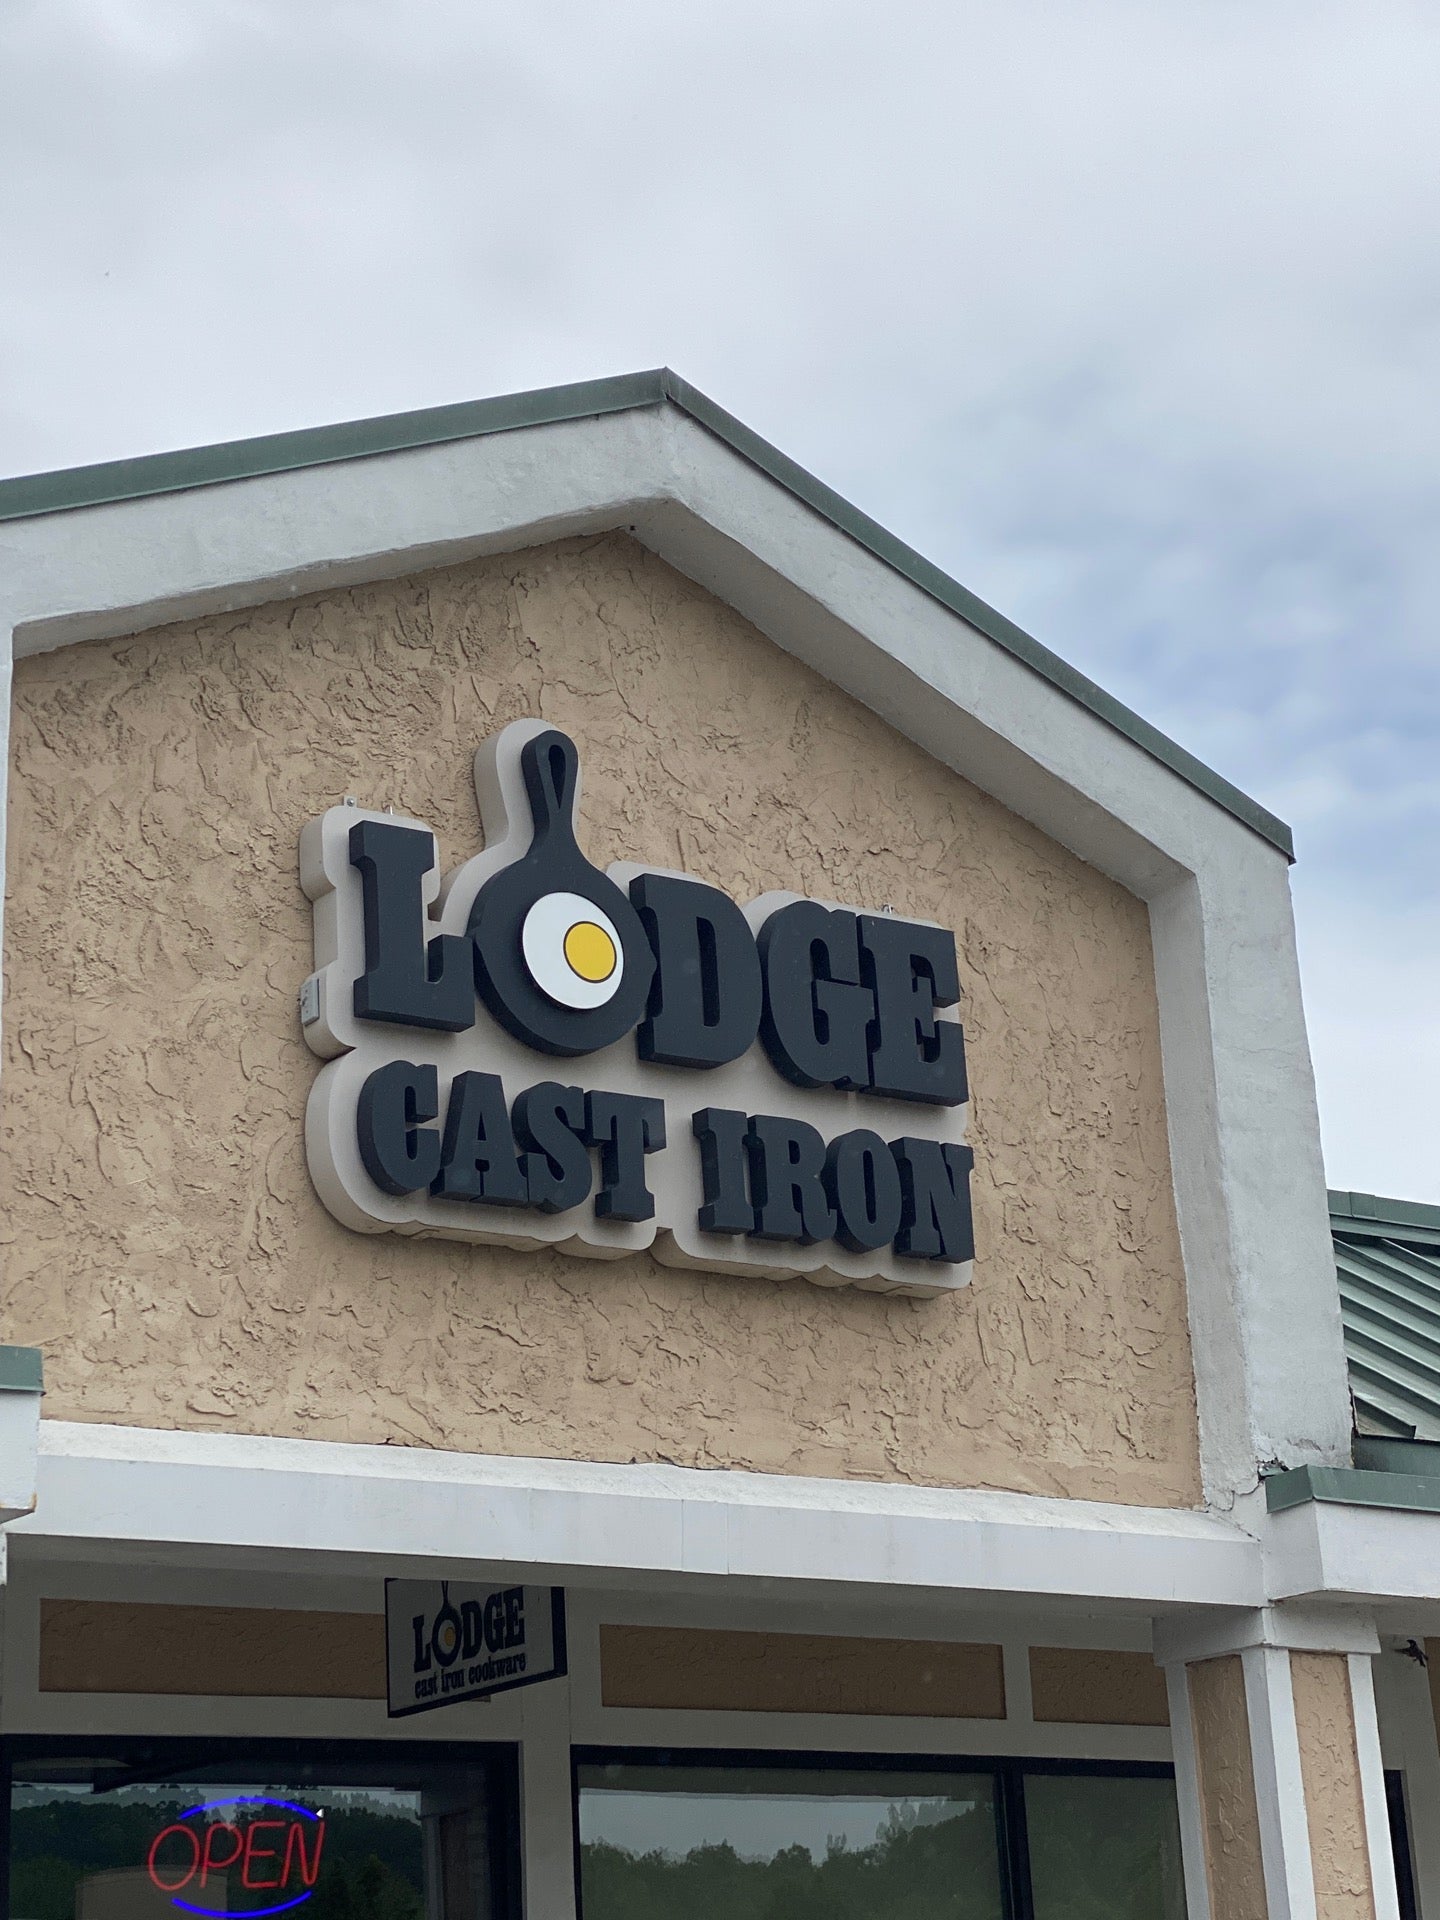 Lodge Cast Iron Factory Store 